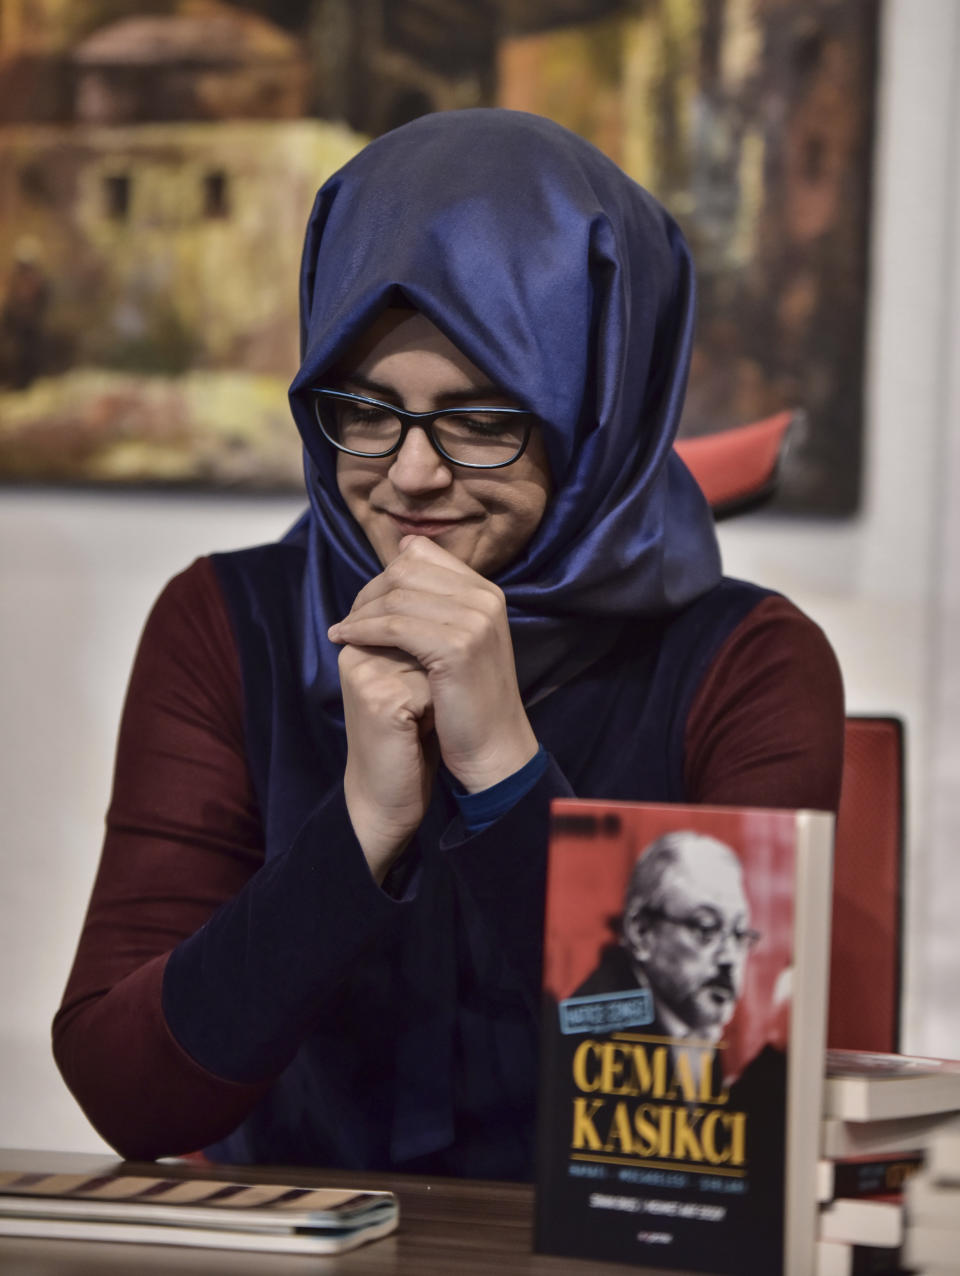 Hatice Cengiz, the fiancee of slain Saudi journalist Jamal Khashoggi, speaks during a news conference to launch a book about the journalist, in Istanbul, Friday, Feb. 8, 2019. Cengiz says she hopeful that his killers will be punished and has appealed to legislators in the European Union and the U.S. Congress to closely follow the case. (DHA via AP)